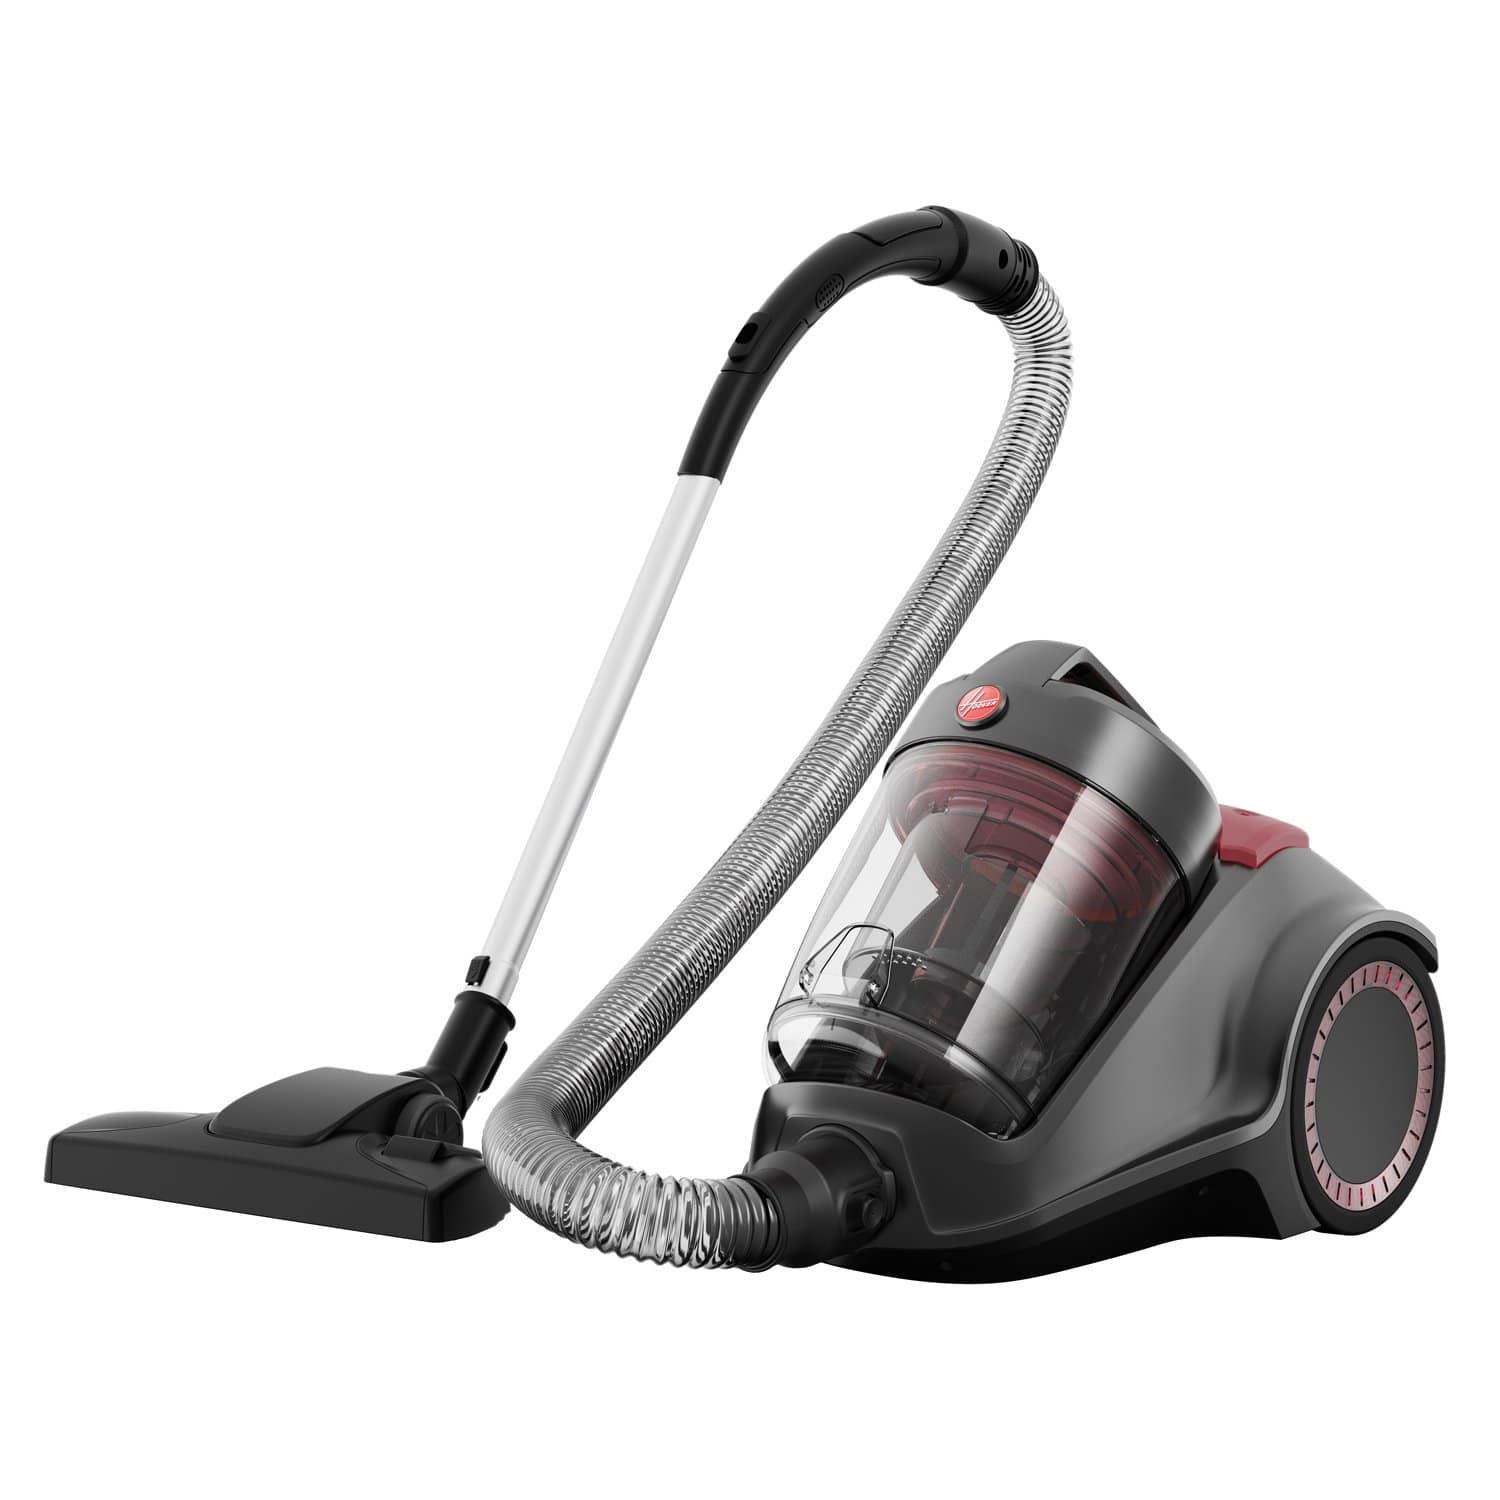 HOOVER POWER 6 ADVANCED VACCUM CLEANER GREY-RED 2200W - CDCY-P6ME